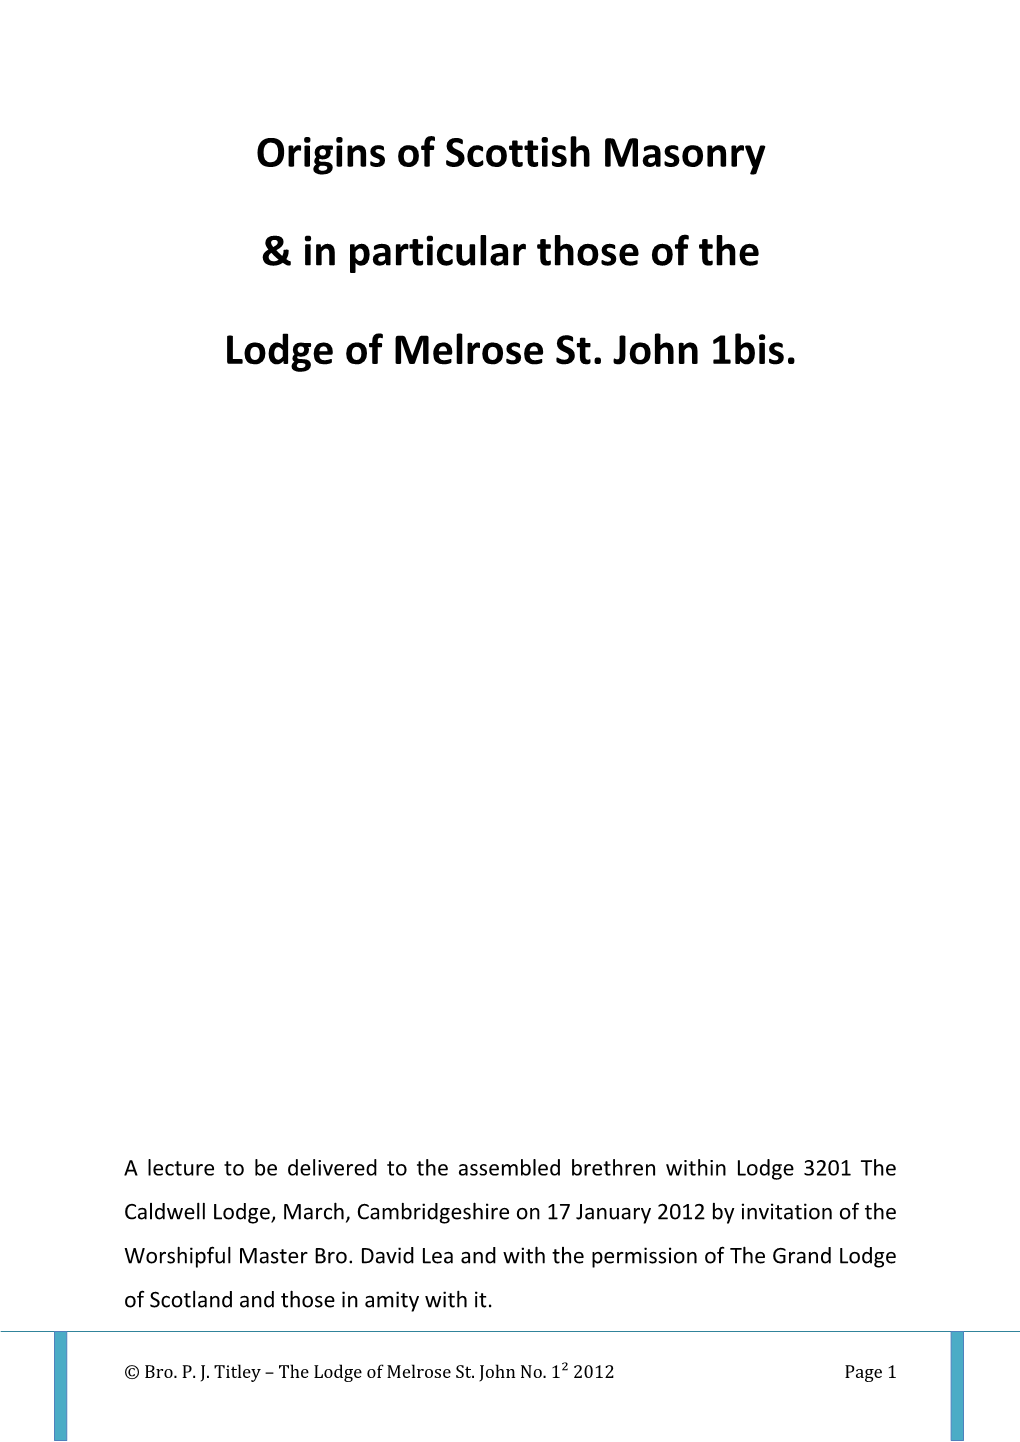 Origins of Scottish Masonry & in Particular Those of the Lodge Of